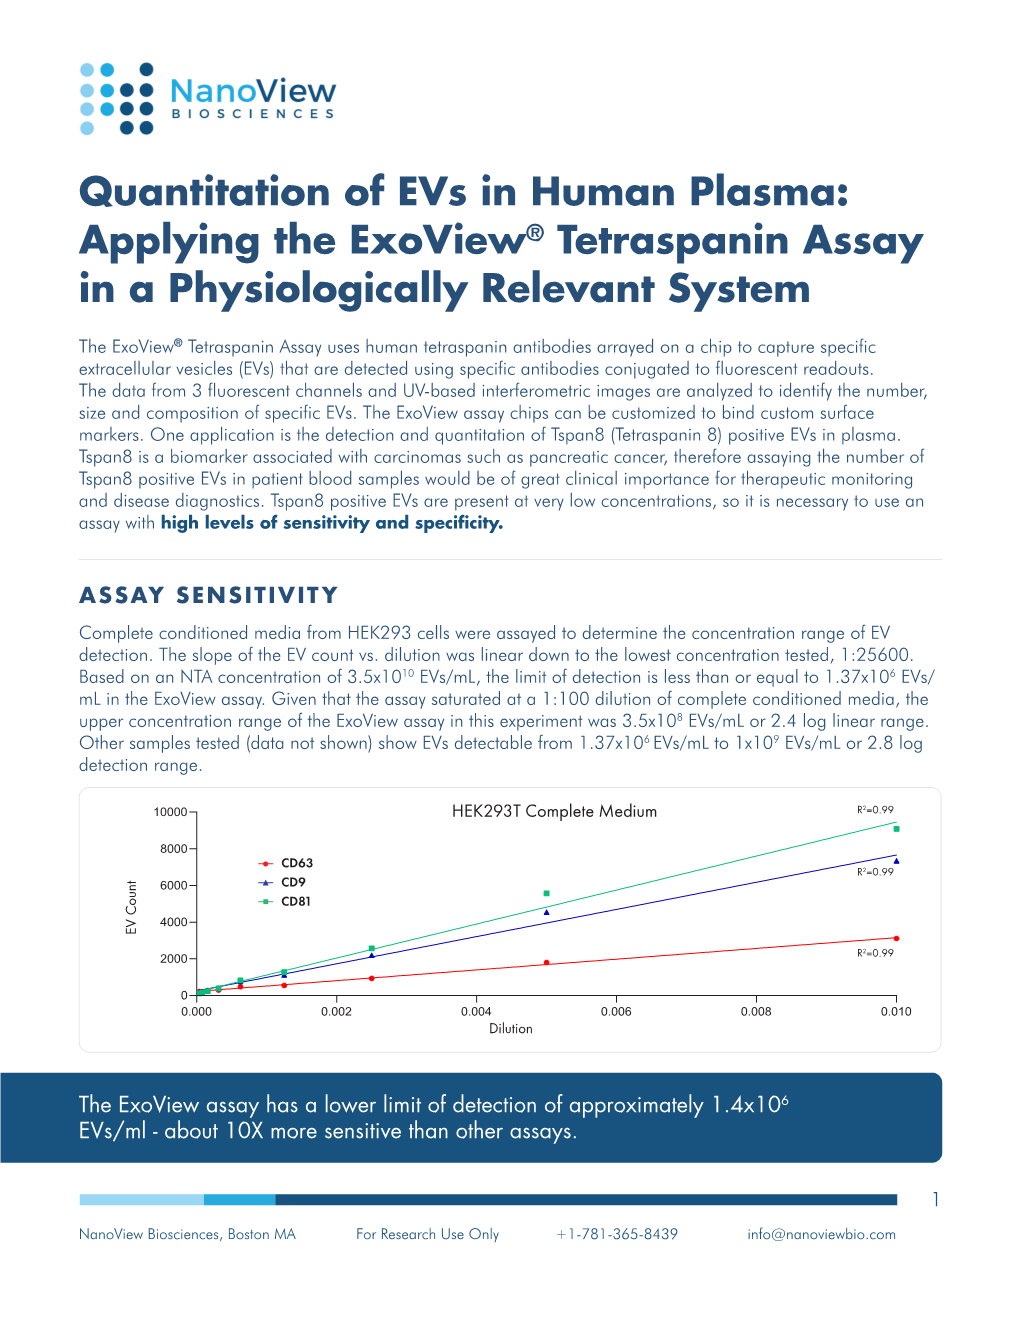 Quantitation of Evs in Human Plasma: Applying the Exoview® Tetraspanin Assay in a Physiologically Relevant System